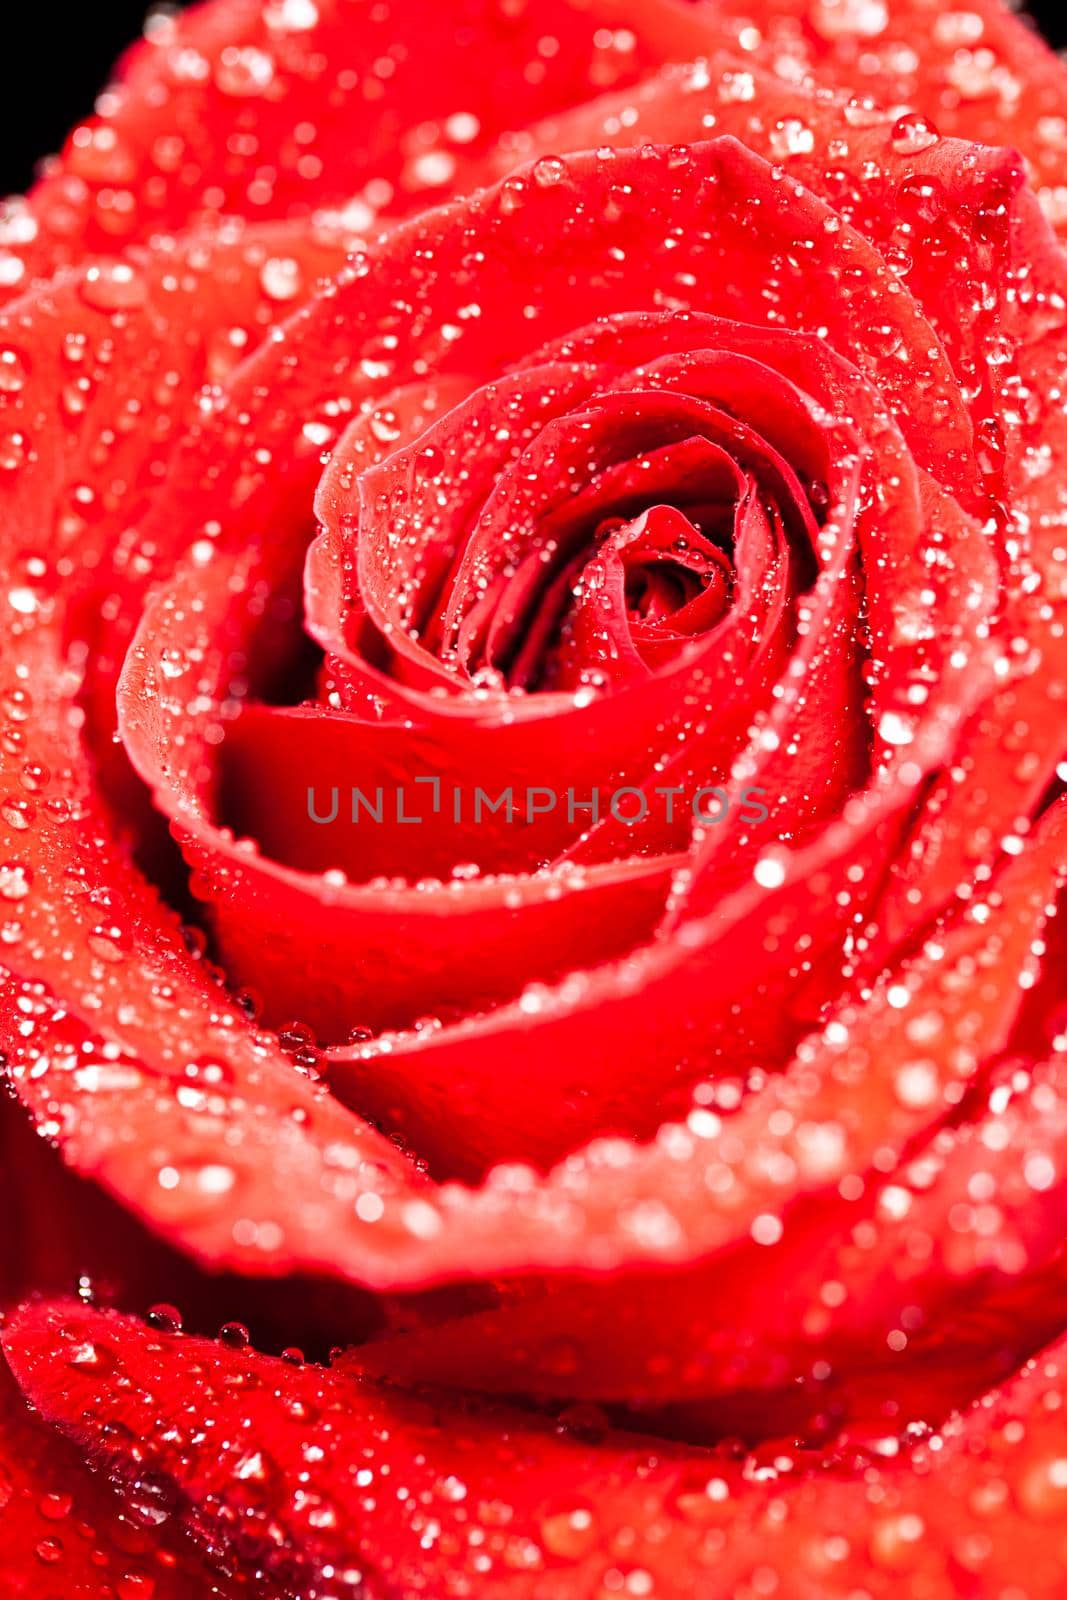 Single beautiful red rose with raindrops over black background. Romantic symbol.